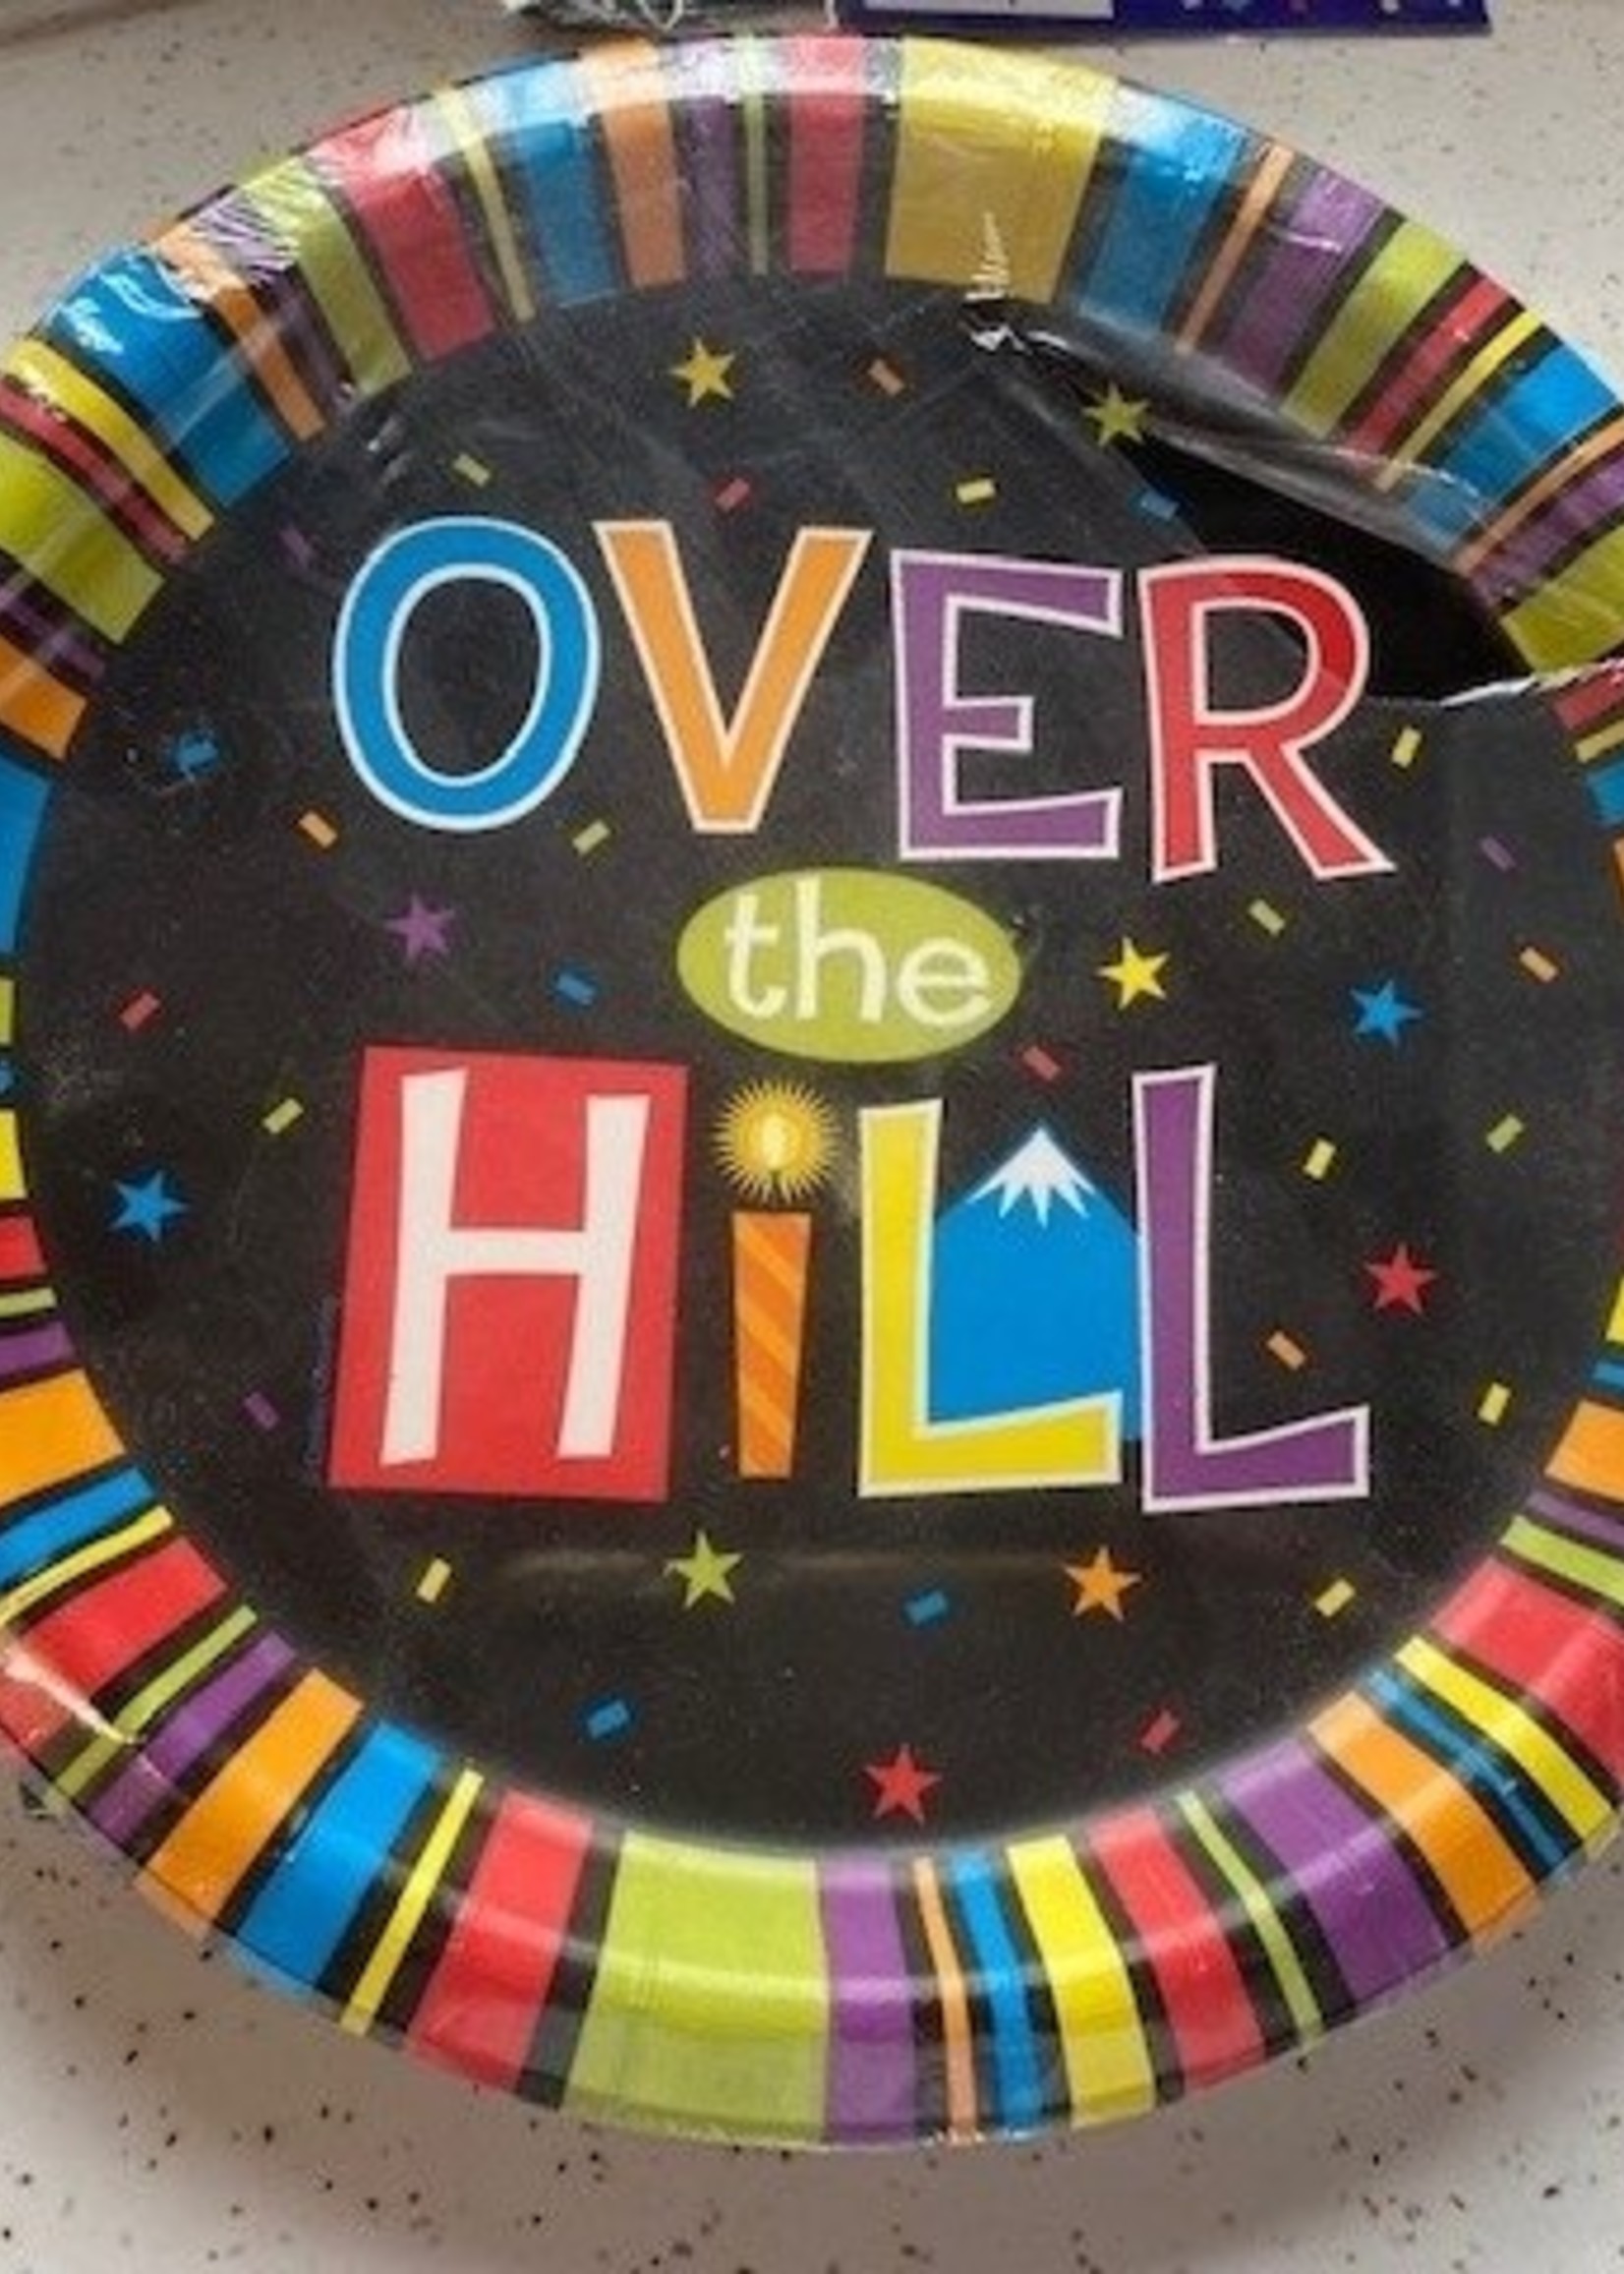 OVER THE HILLPLATE